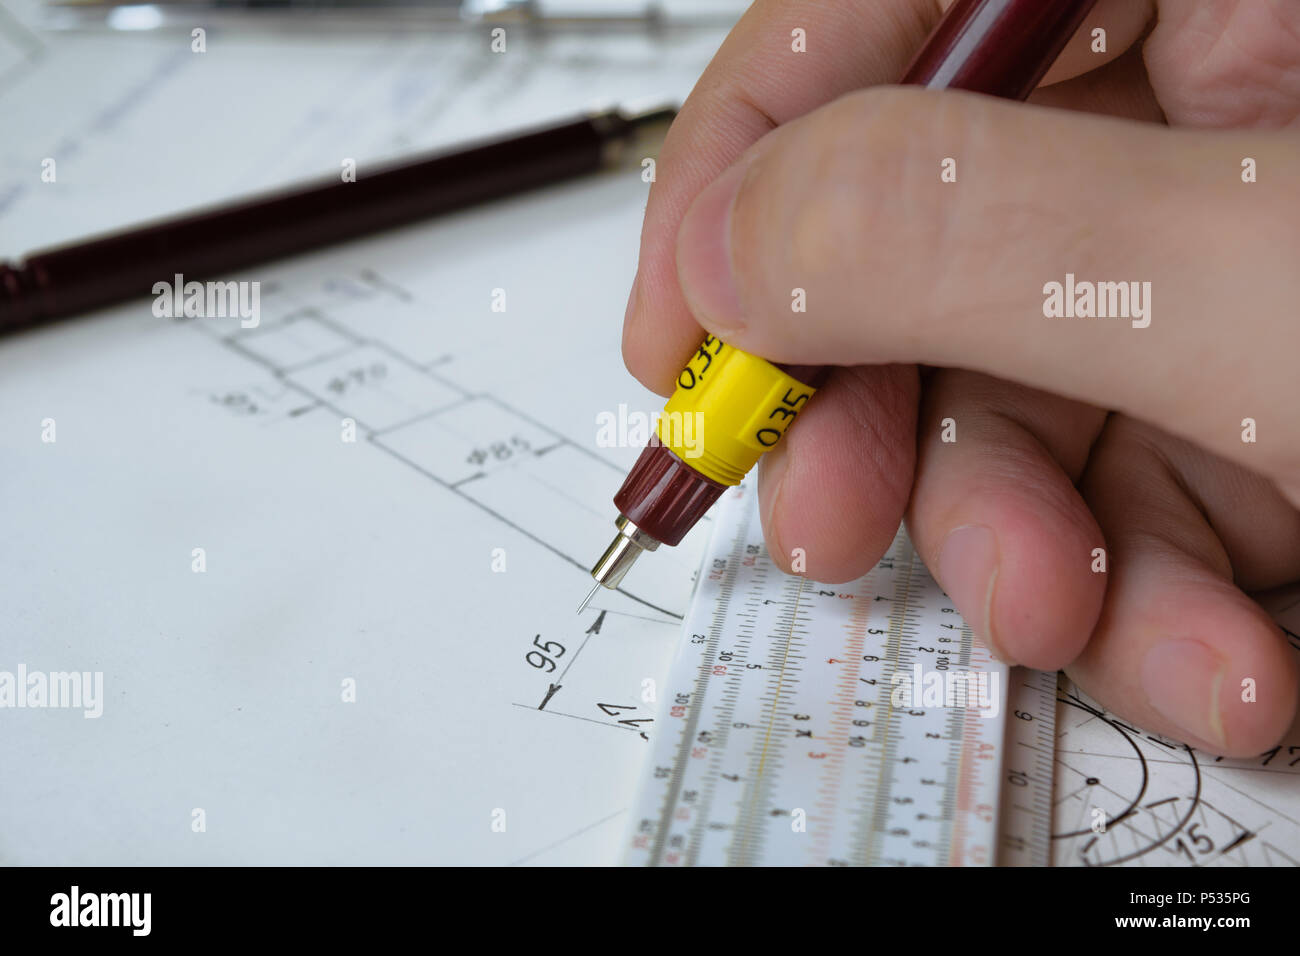 Engineer holding technical pen and works on a hand drawn technical drawing, sliderule Stock Photo